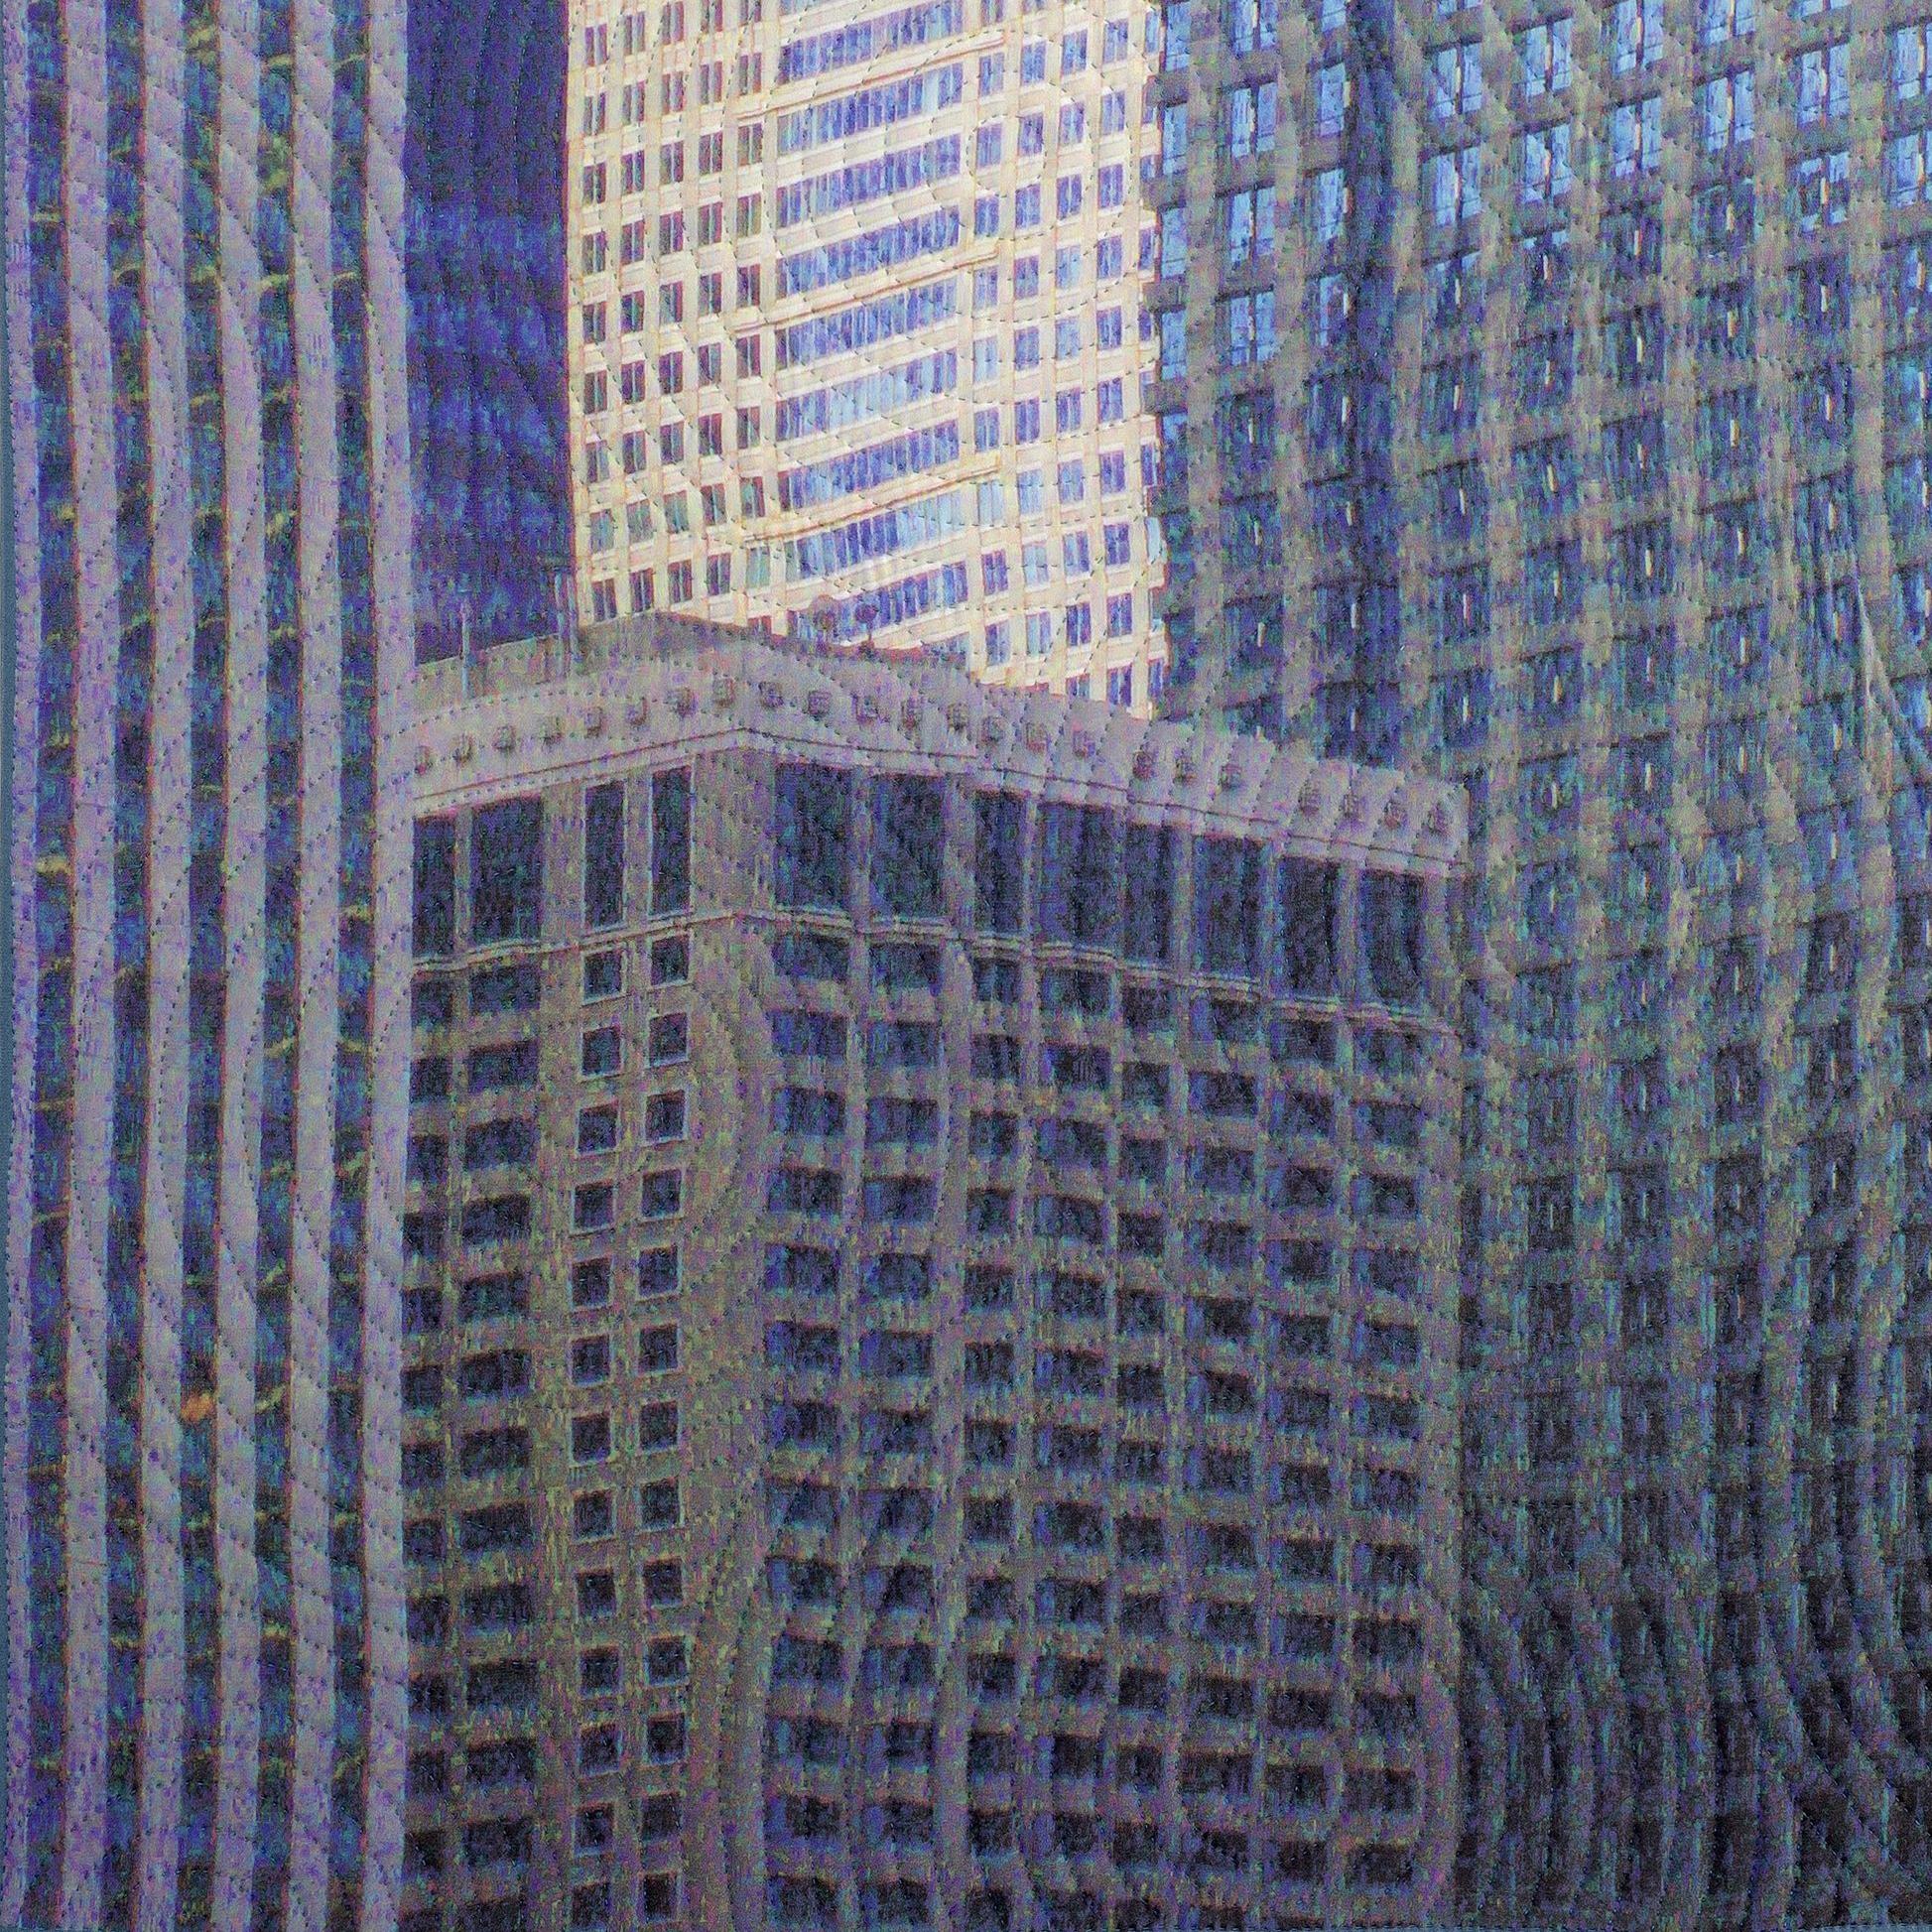 Chicago Windows 1453, Mixed Media on Canvas - Contemporary Mixed Media Art by Marilyn Henrion